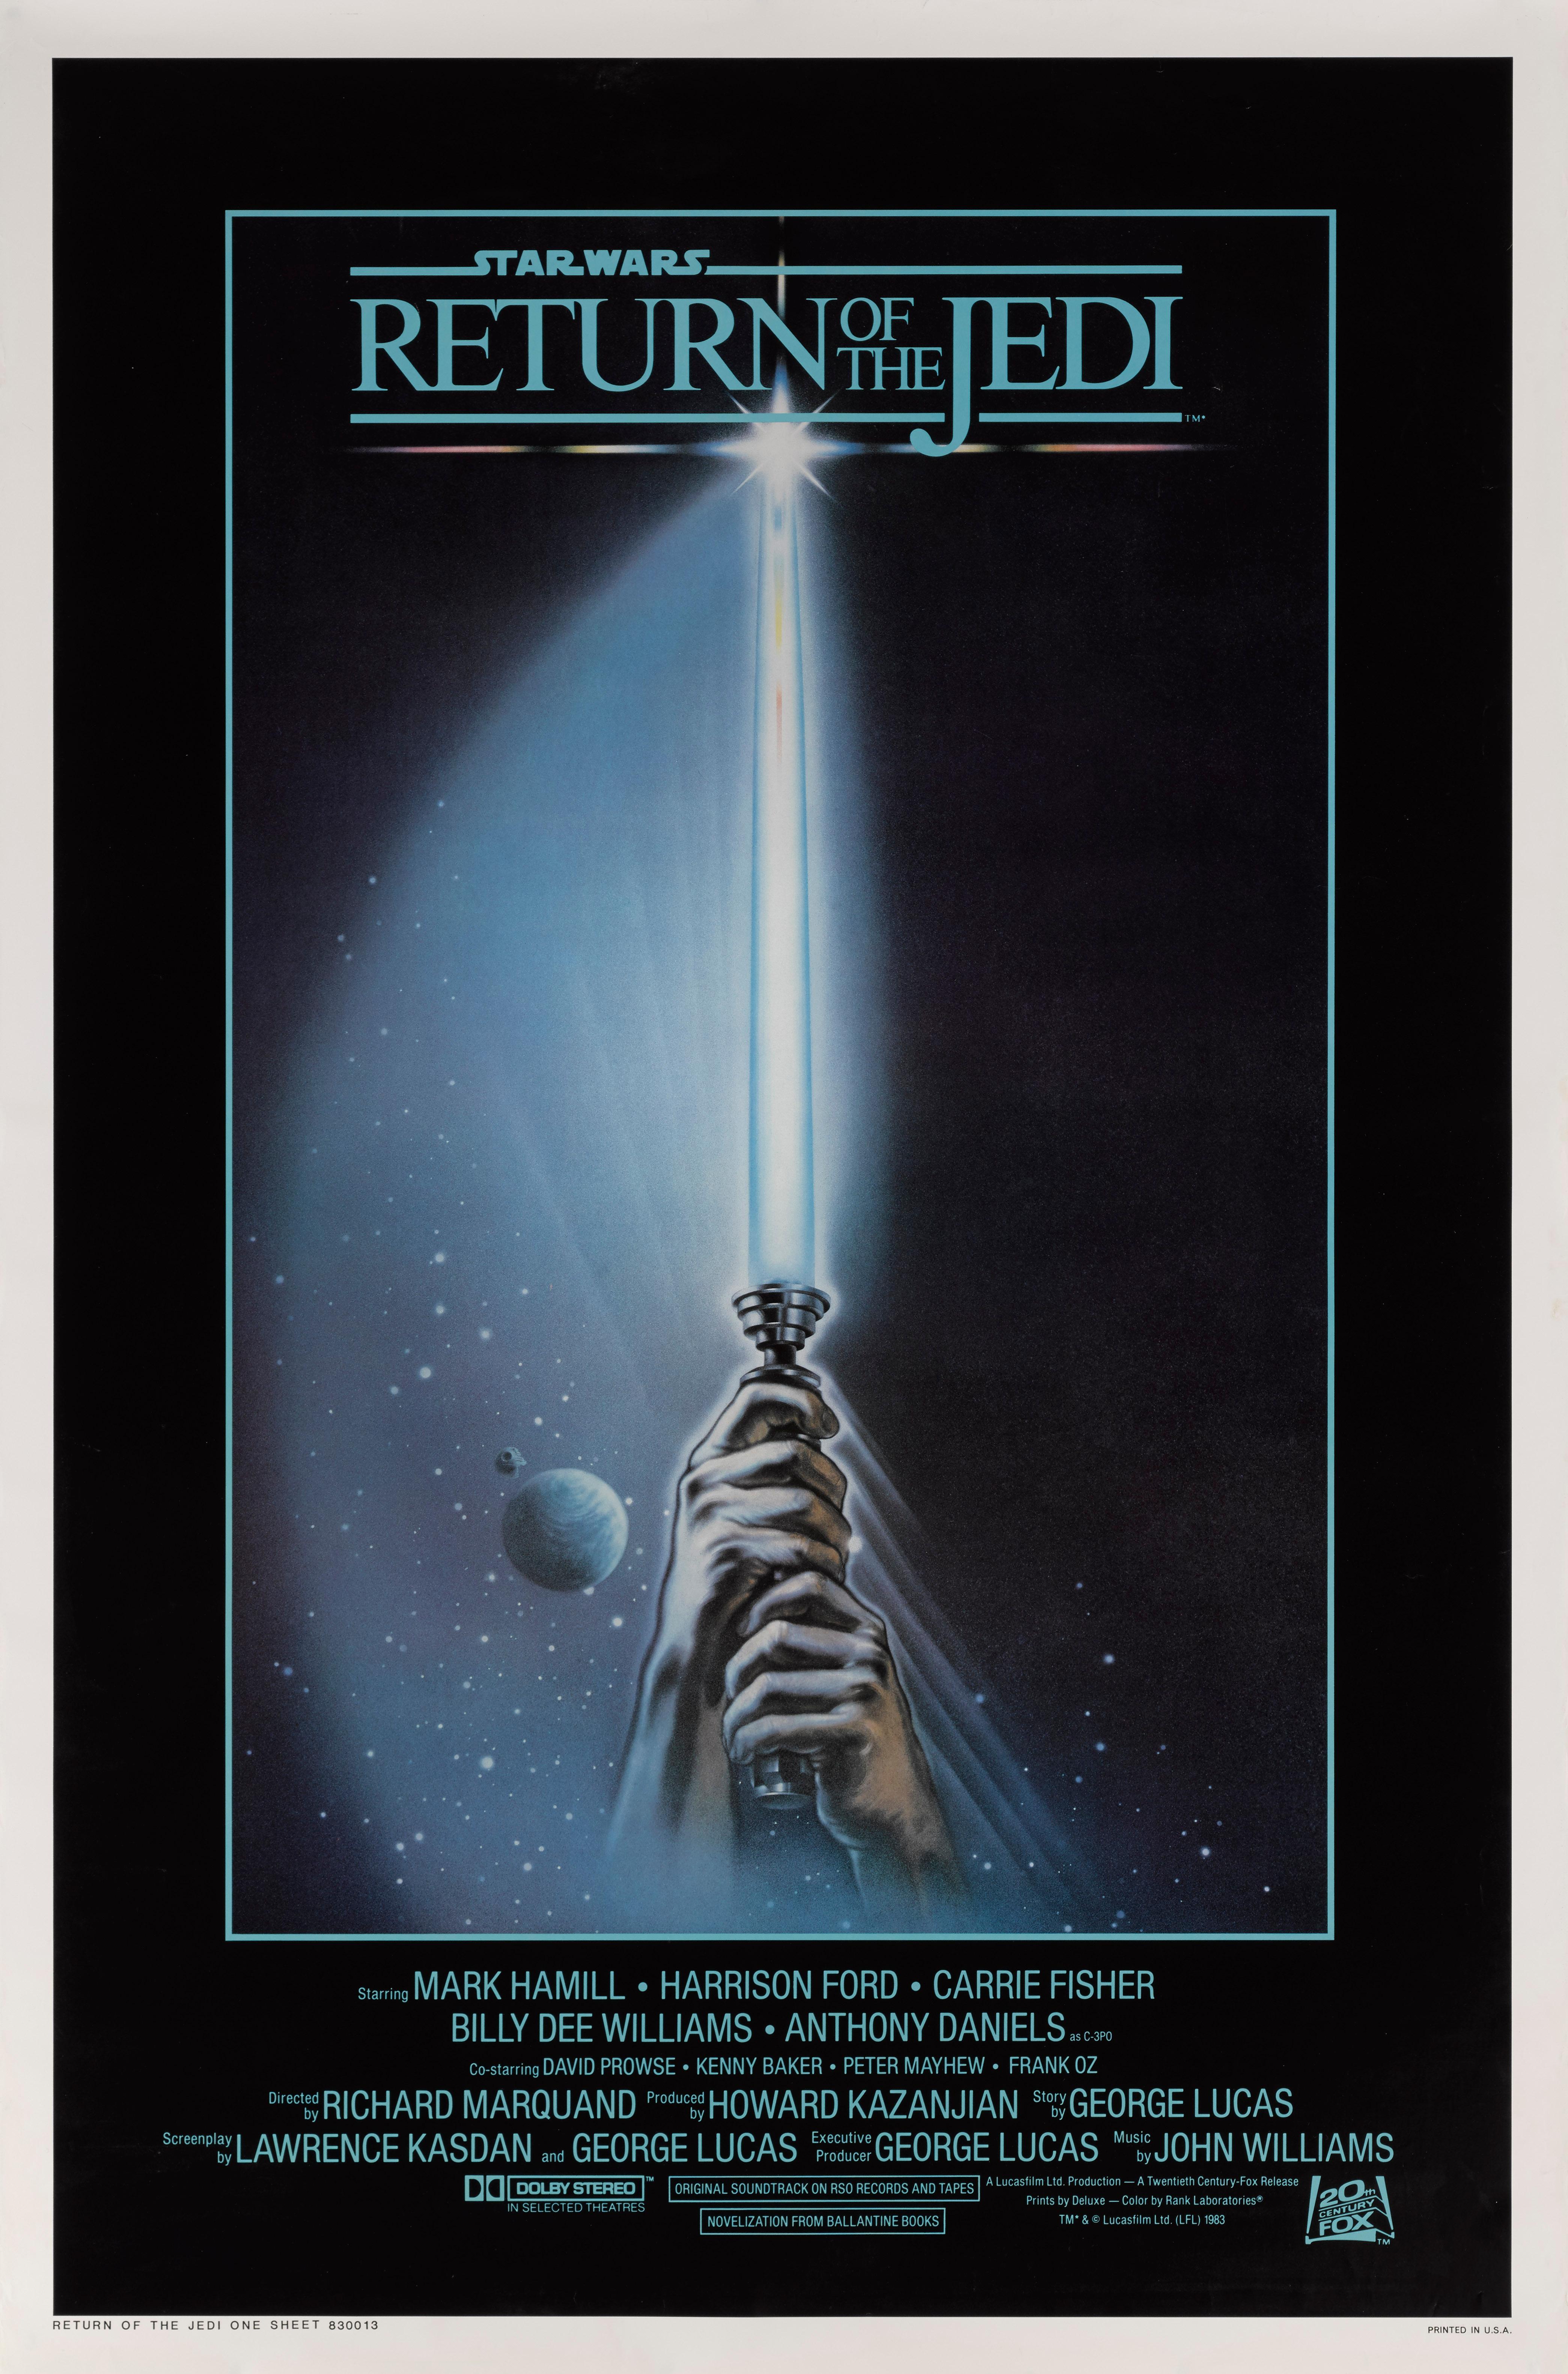 Original US film poster for the 1983 Third Star Wars film. Staring Mark Hamill, Harrison Ford, Carrie Fisher. The art work on this poster is by Tim Reamer (dates unknown) This poster is in near mint condition and unfolded and conservation linen